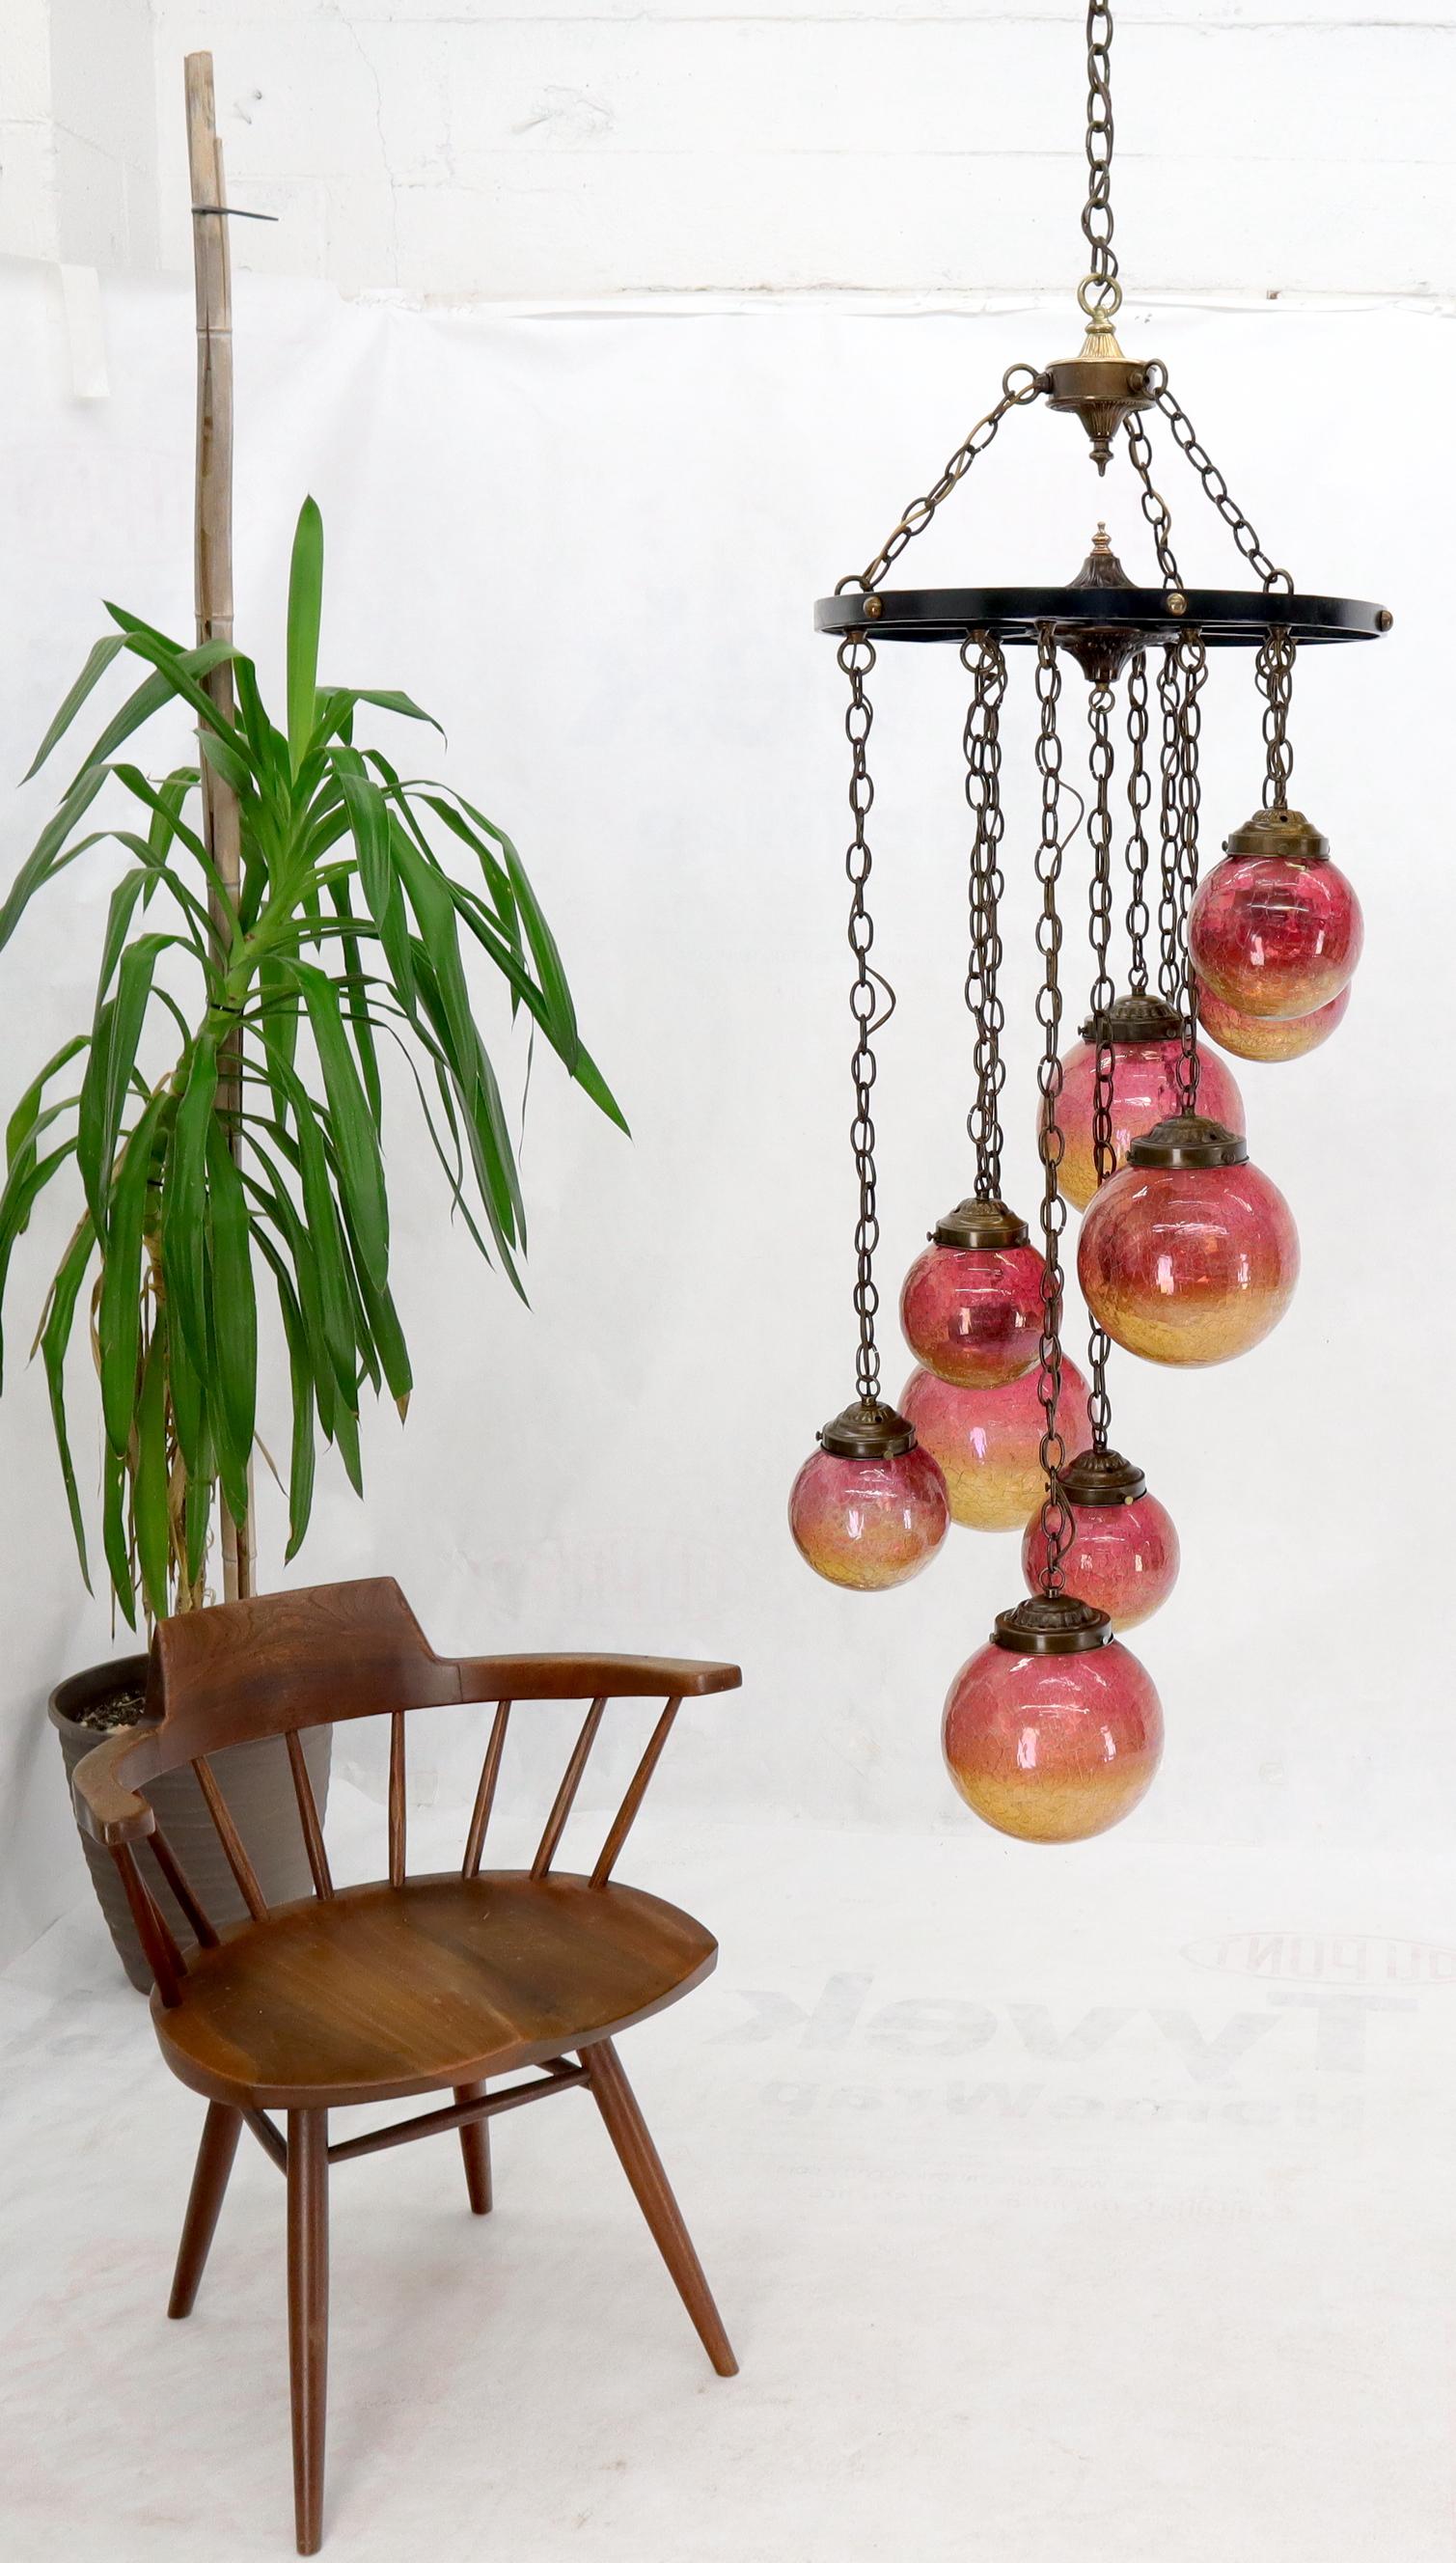 Ruby & Amber Globes on Chain Chandelier Light Fixture For Sale 4